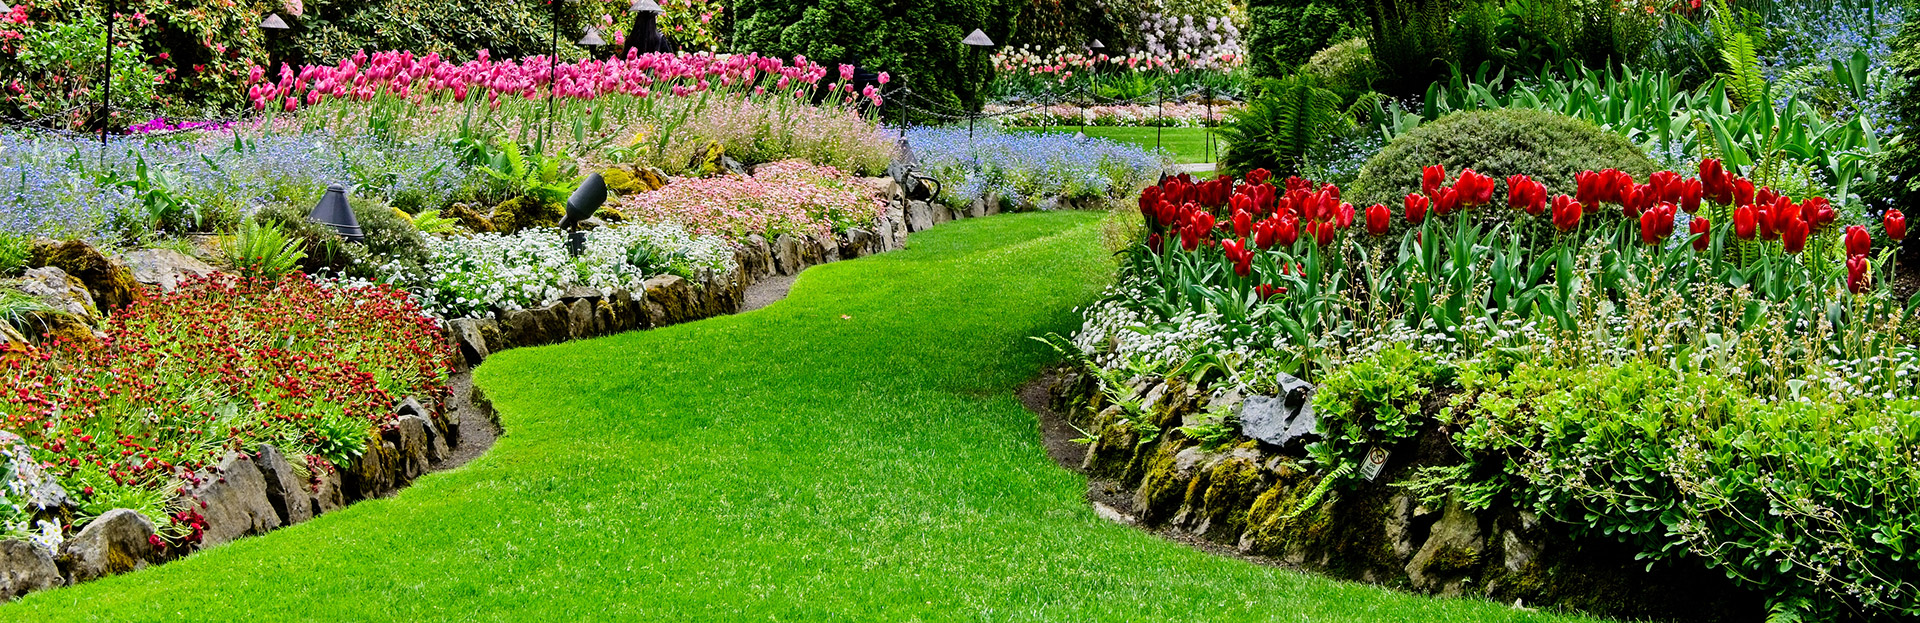 planting and garden services in toronto